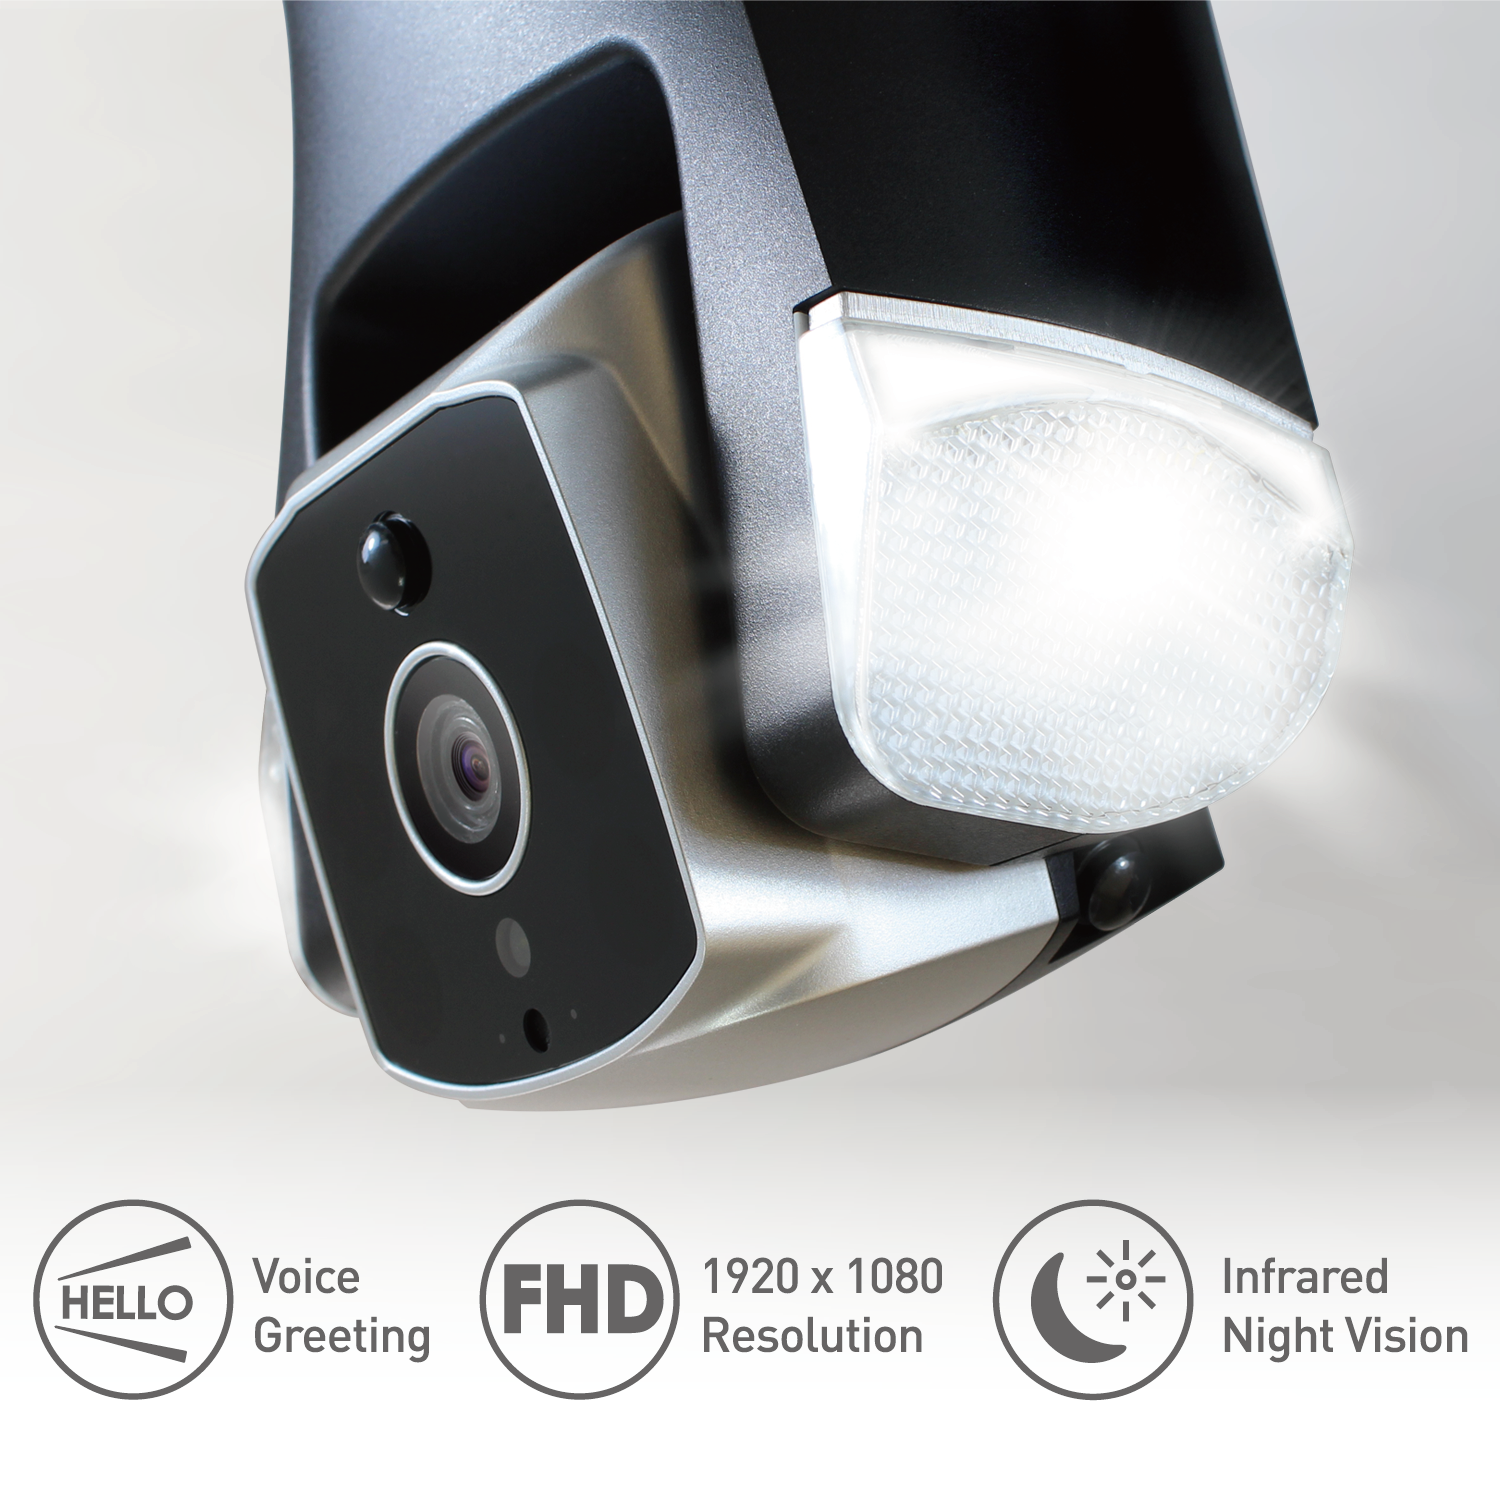 Ares Pro Outdoor Security Camera